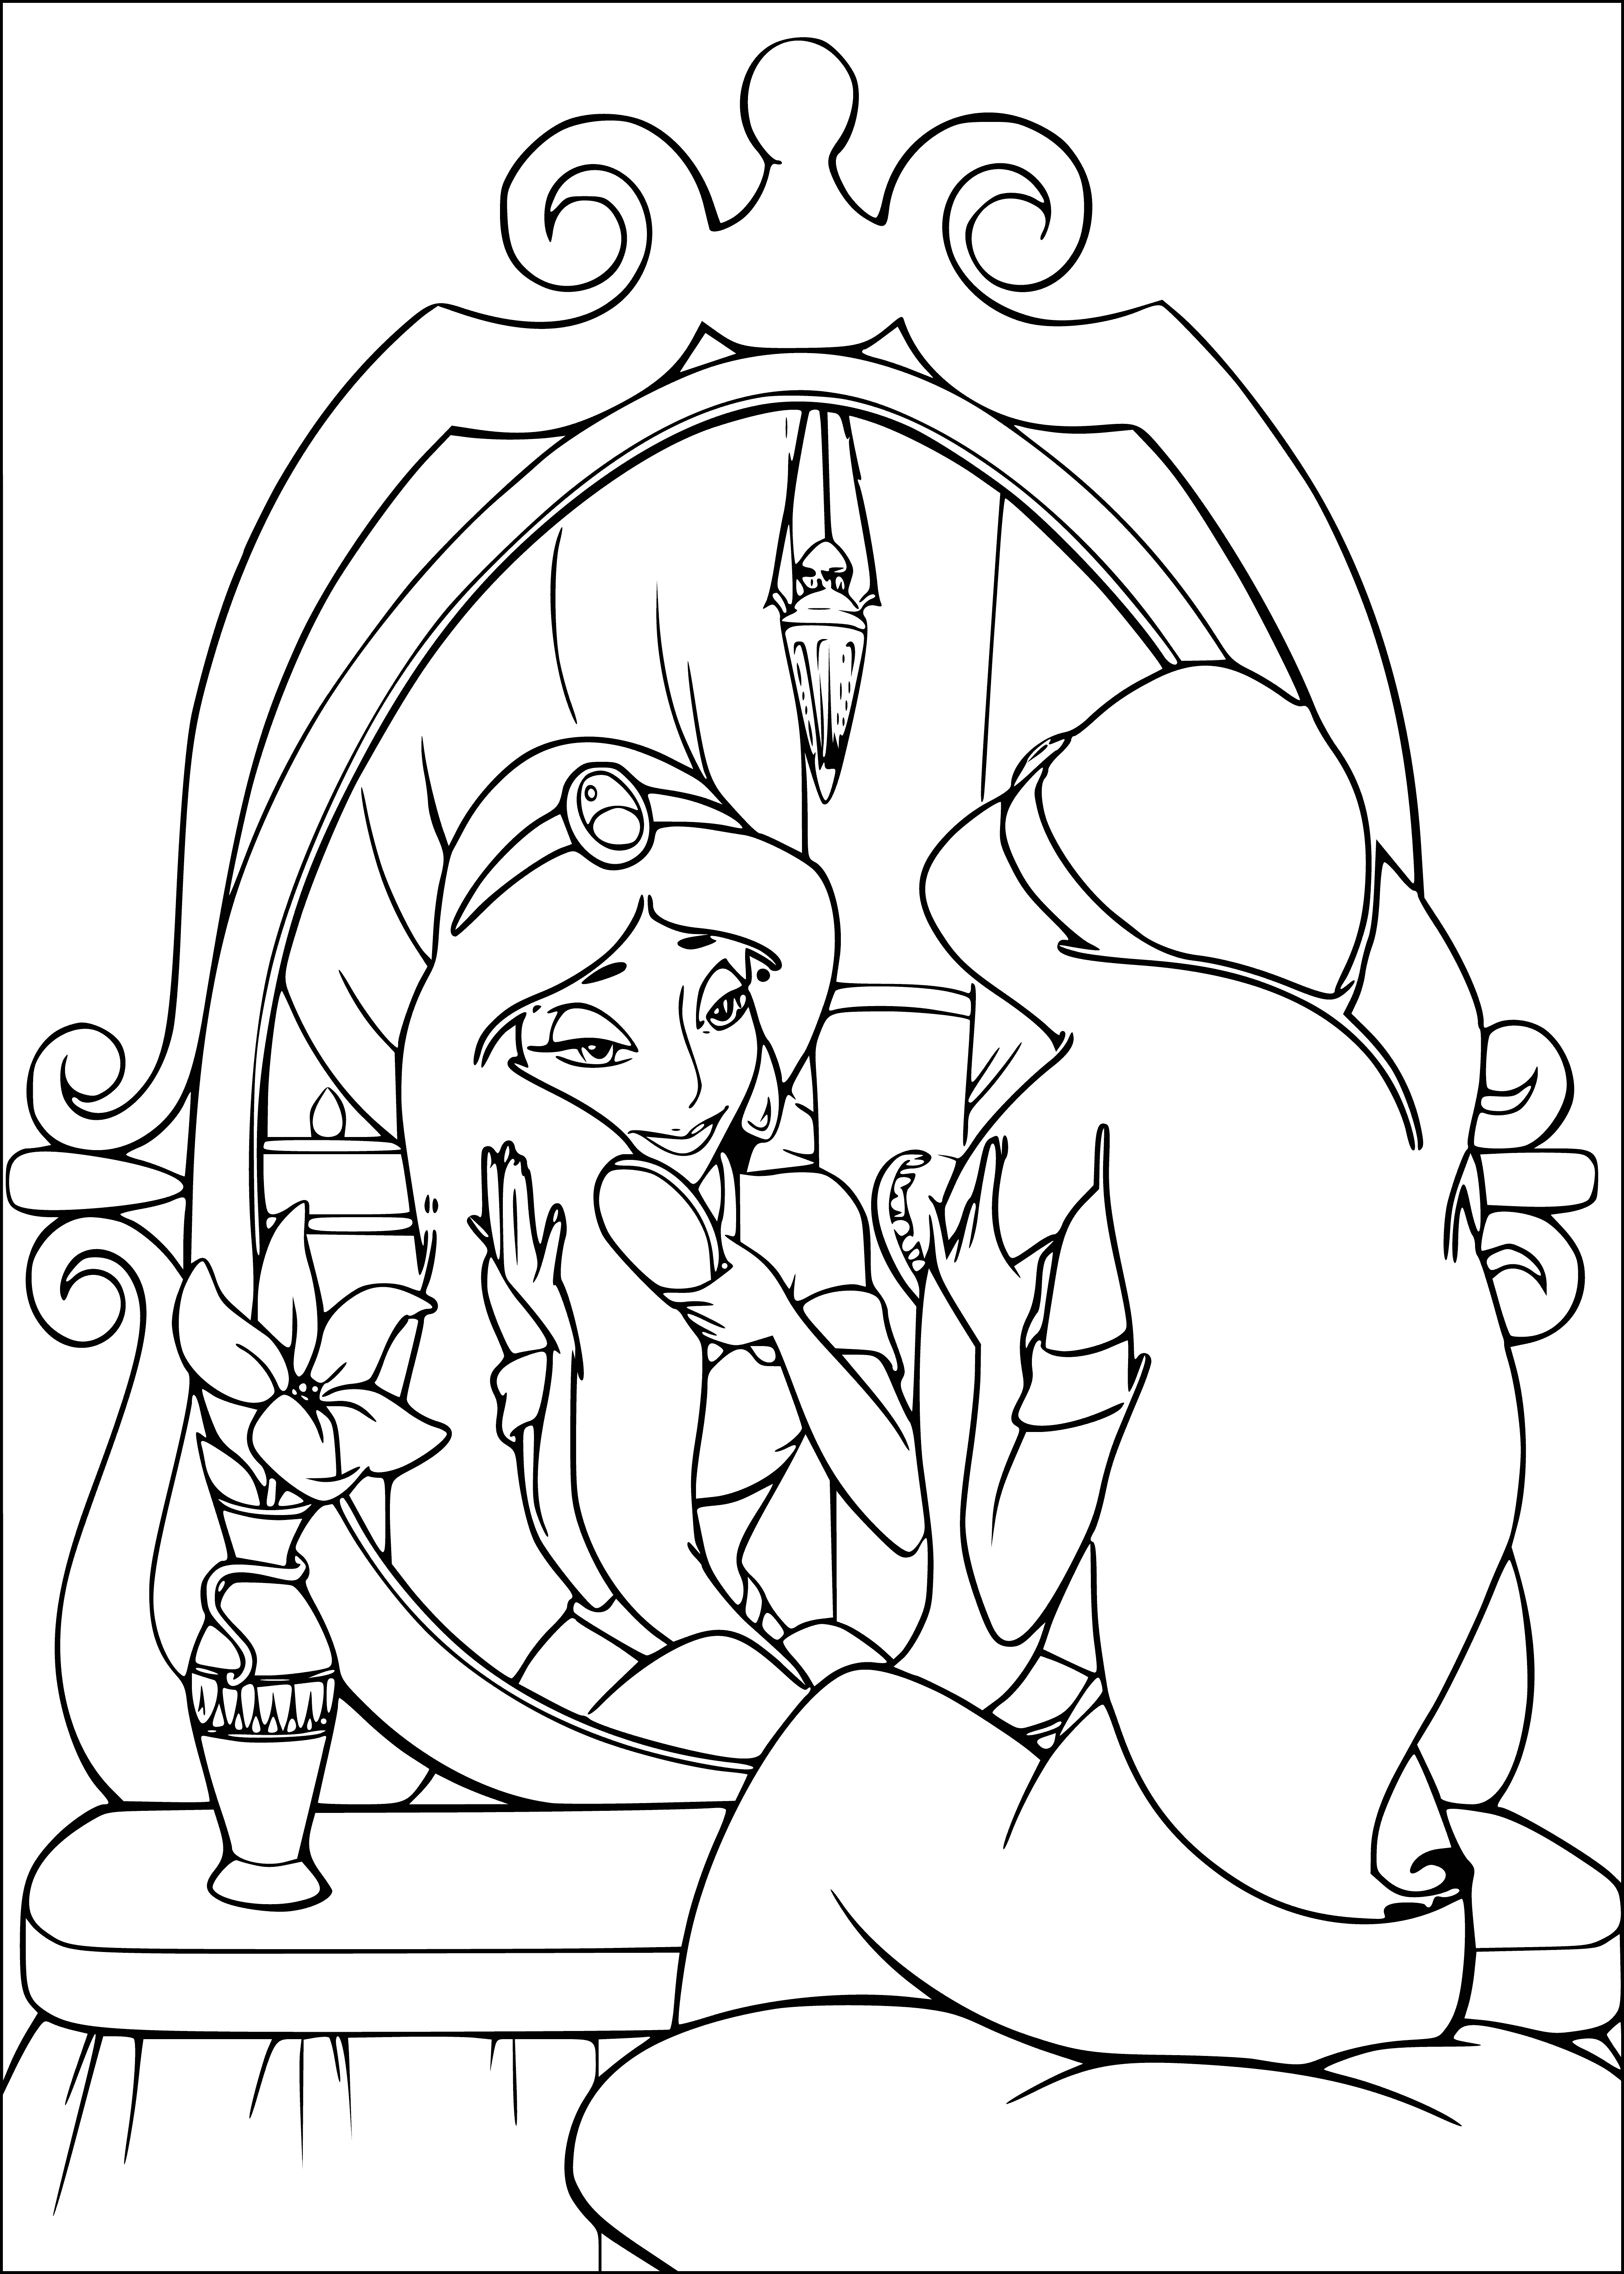 coloring page: Aladdin kneels, holding Princess Jasmine's hand with a ring box. She smiles. A romantic moment.